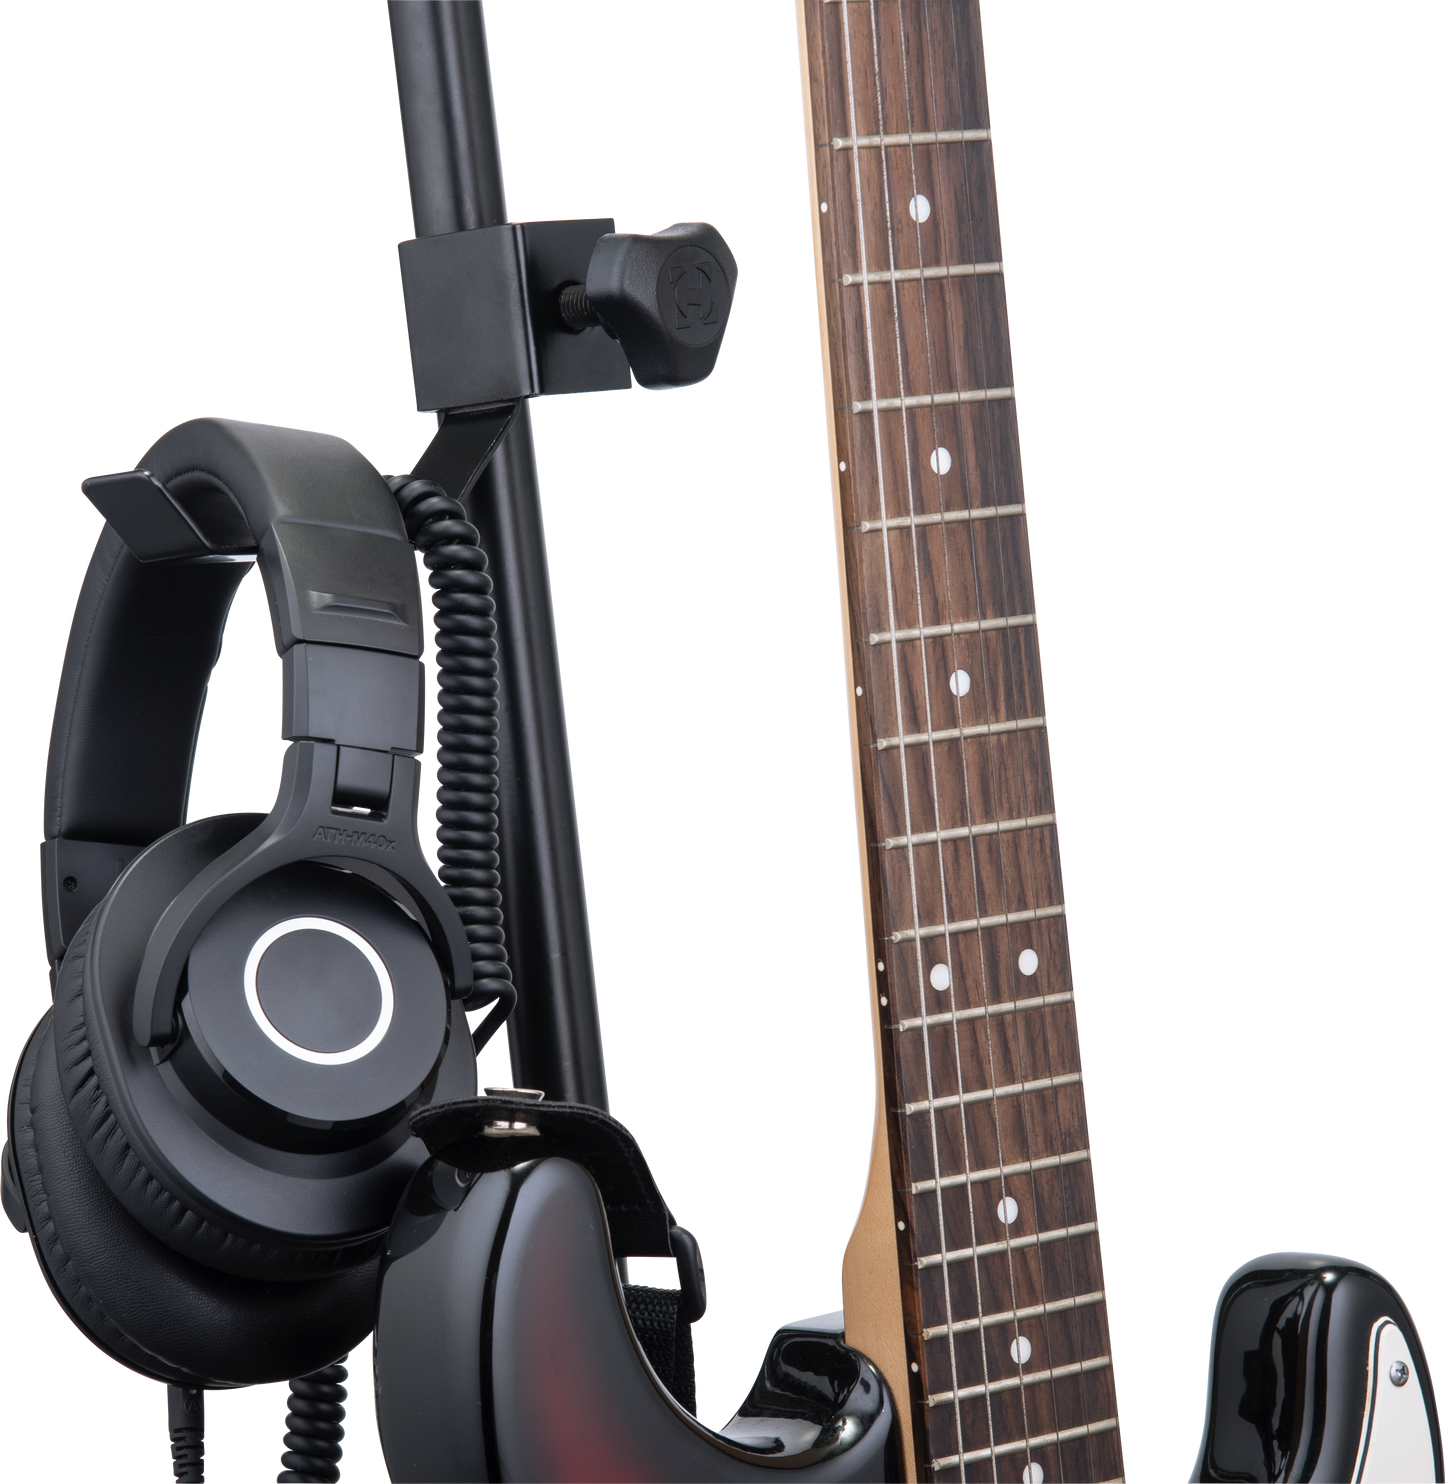 GUITAR STRAP AND HEADPHONE HOLDER